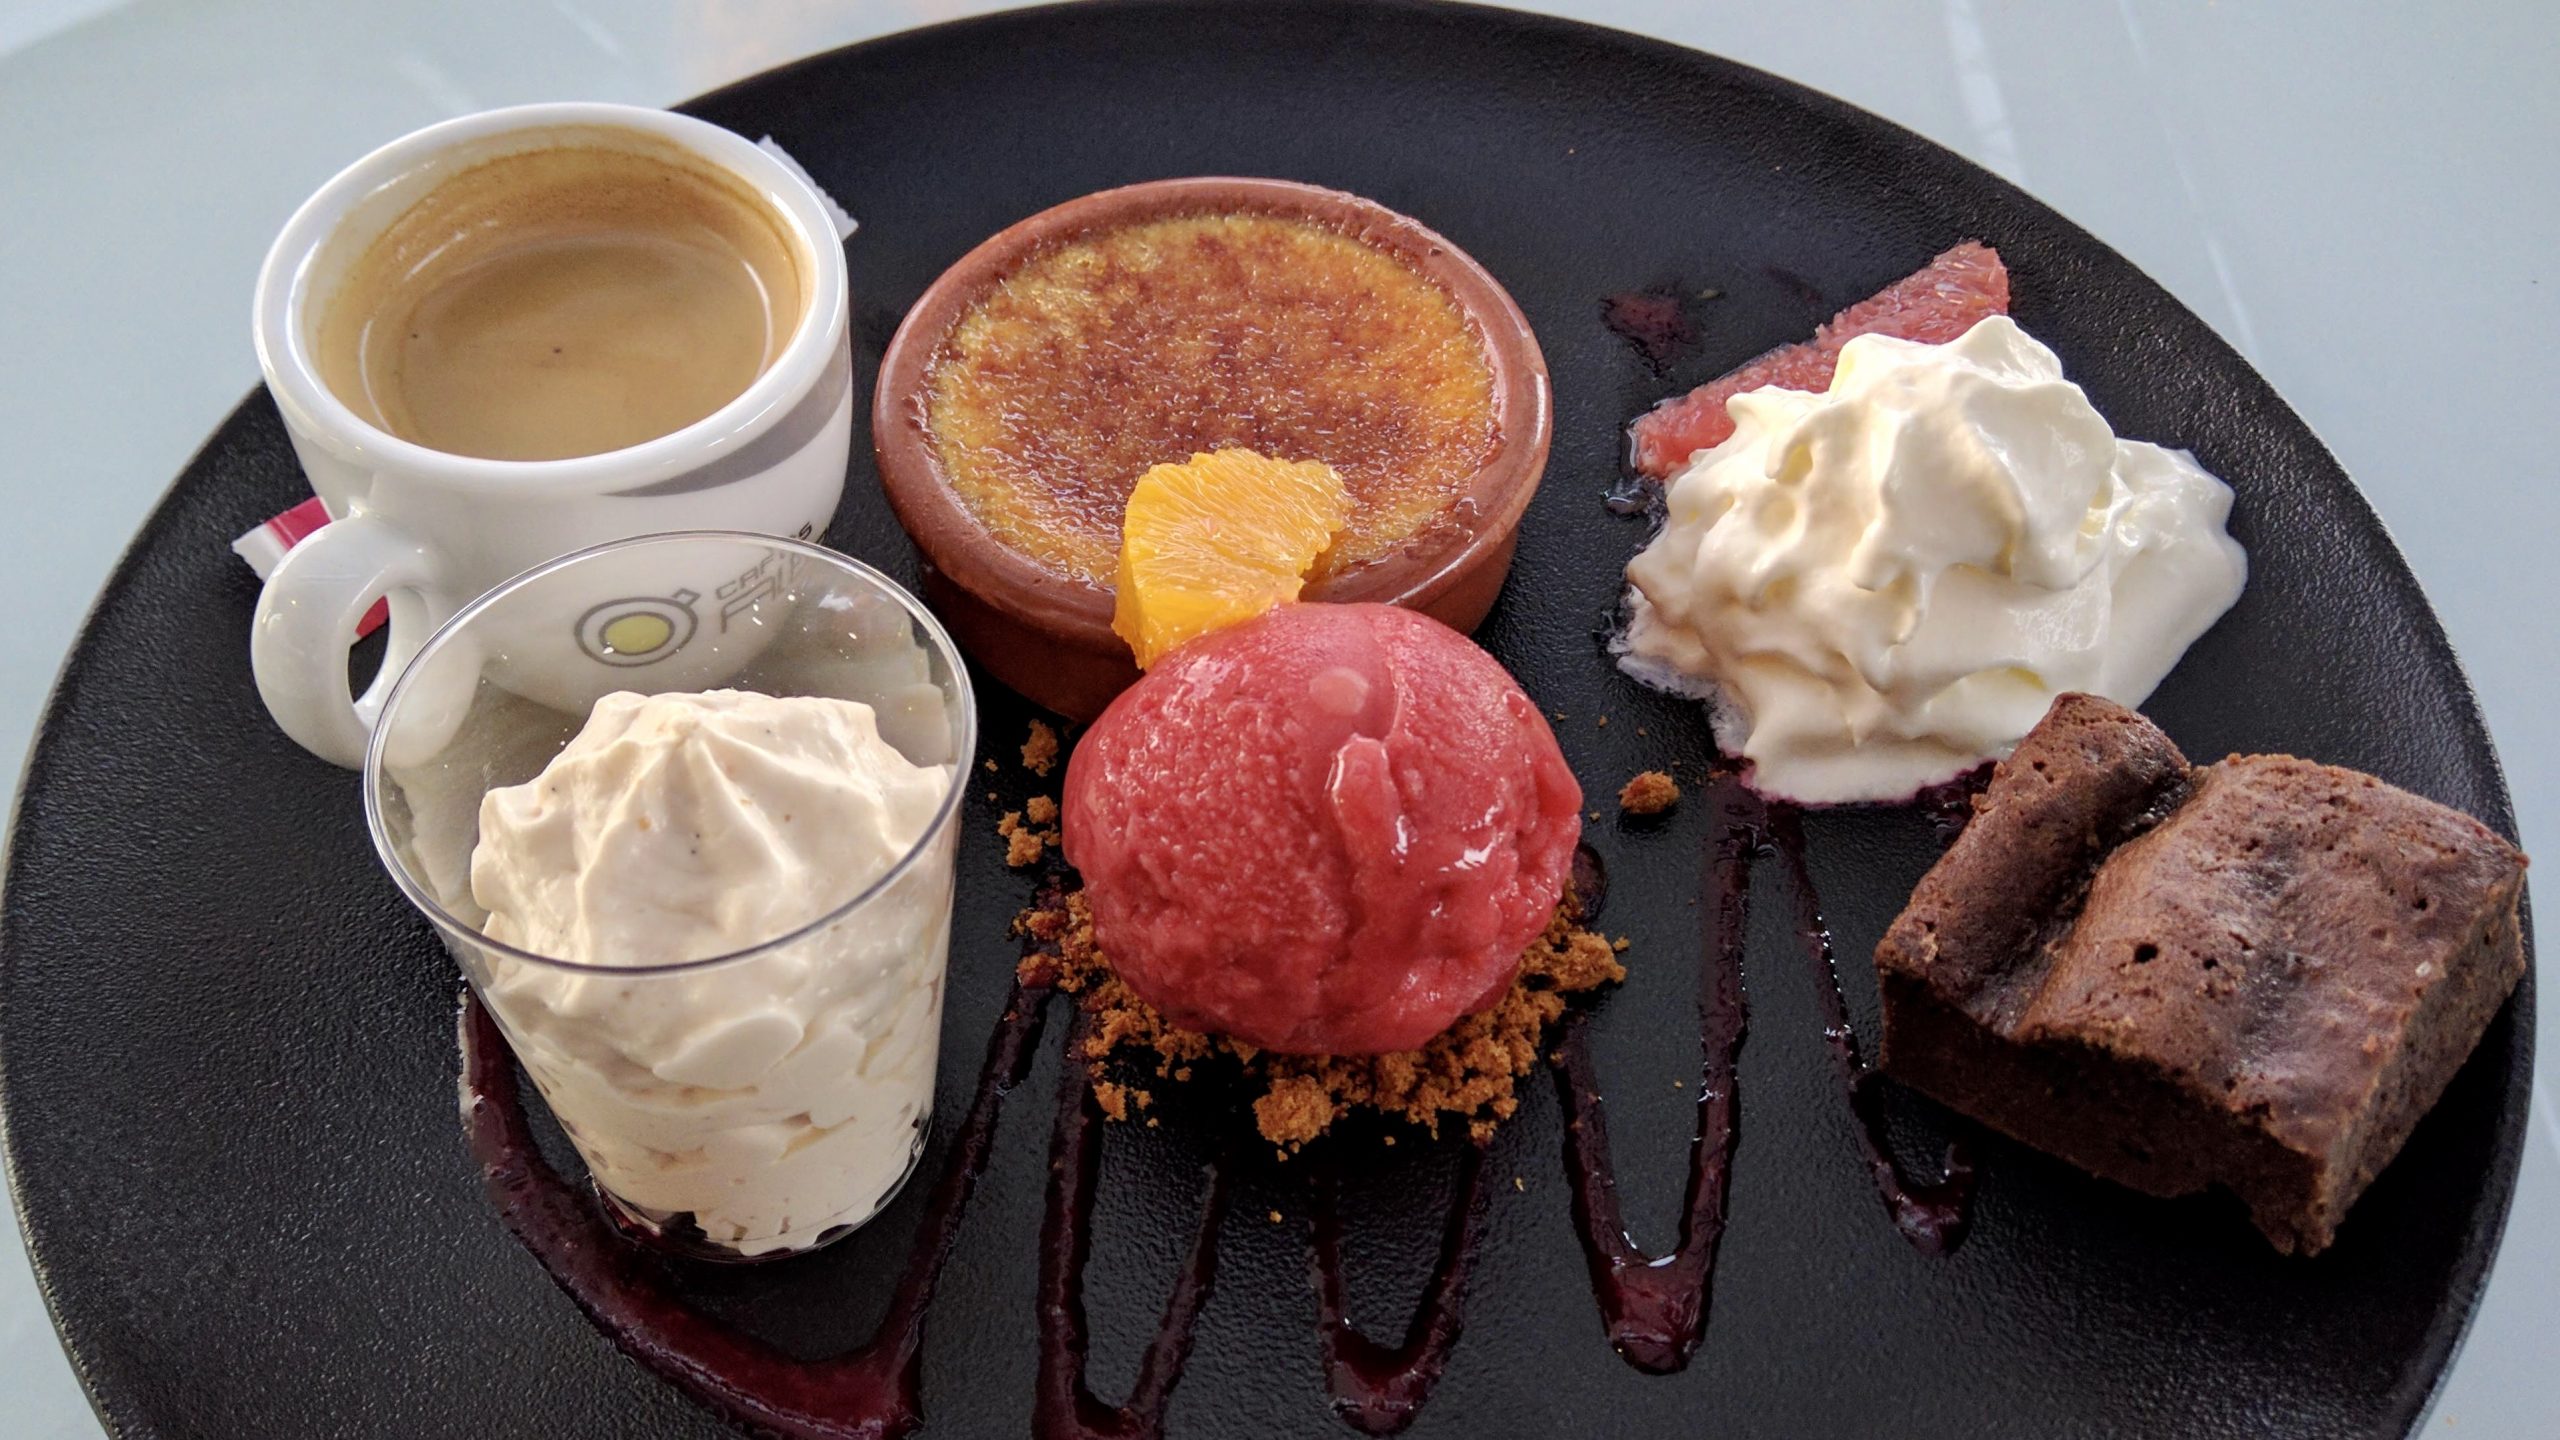 A dessert in small French village